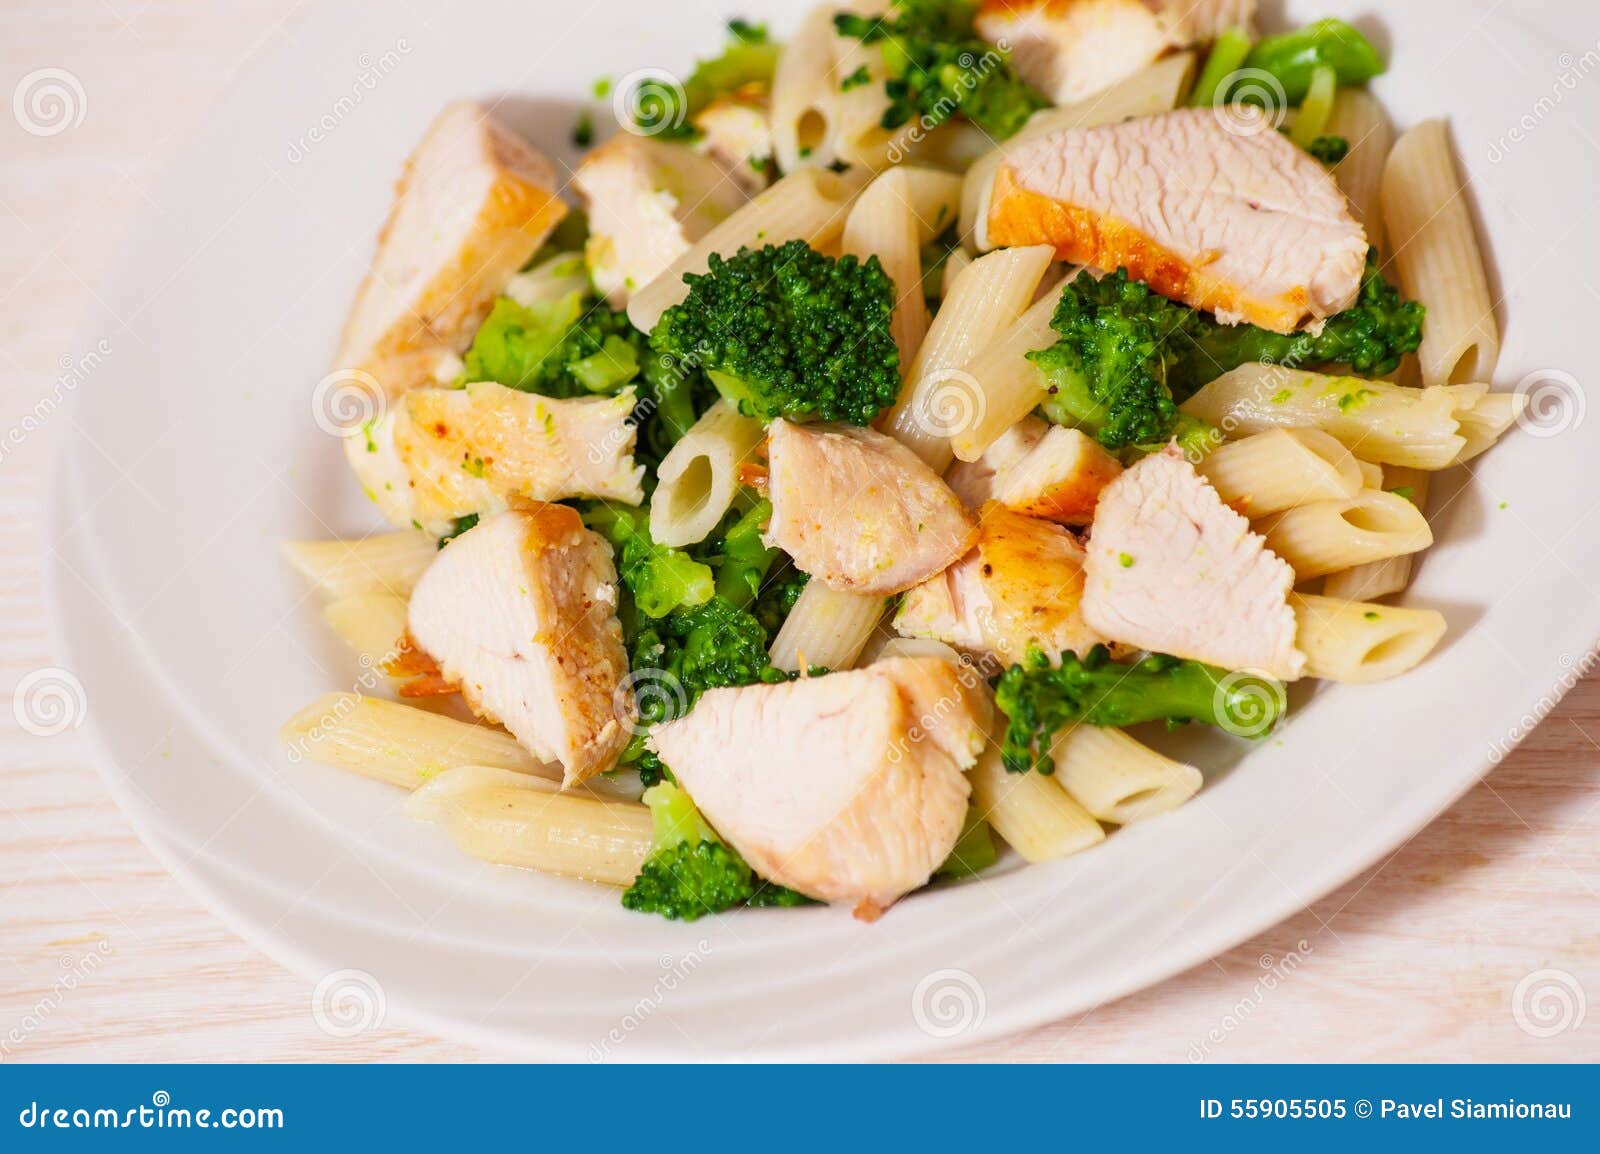 Penne Pasta with Chicken and Broccoli Stock Image - Image of baked